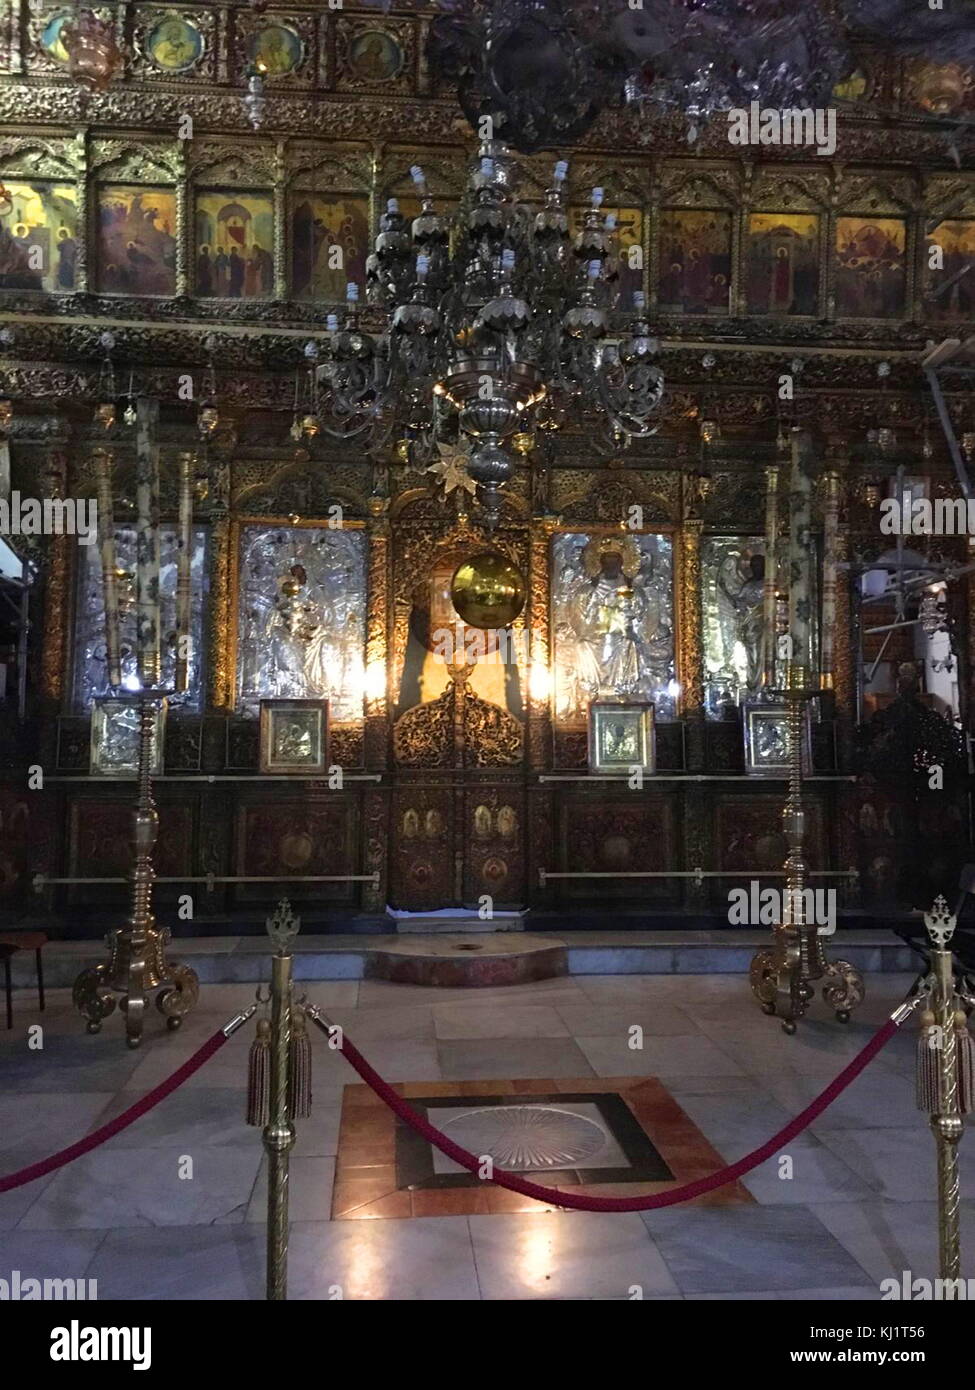 Restored altar in the Church of the Nativity; Bethlehem, in the West Bank, Palestine. The church was originally commissioned in 327 by Constantine the Great and his mother Helena over the site that was traditionally considered the birthplace of Jesus. The Church of the Nativity site's original basilica was completed in 339 and destroyed by fire during the Samaritan Revolts in the 6th century. A new basilica was built 565 by Justinian, the Byzantine Emperor, restoring the architectural tone of the original. Stock Photo